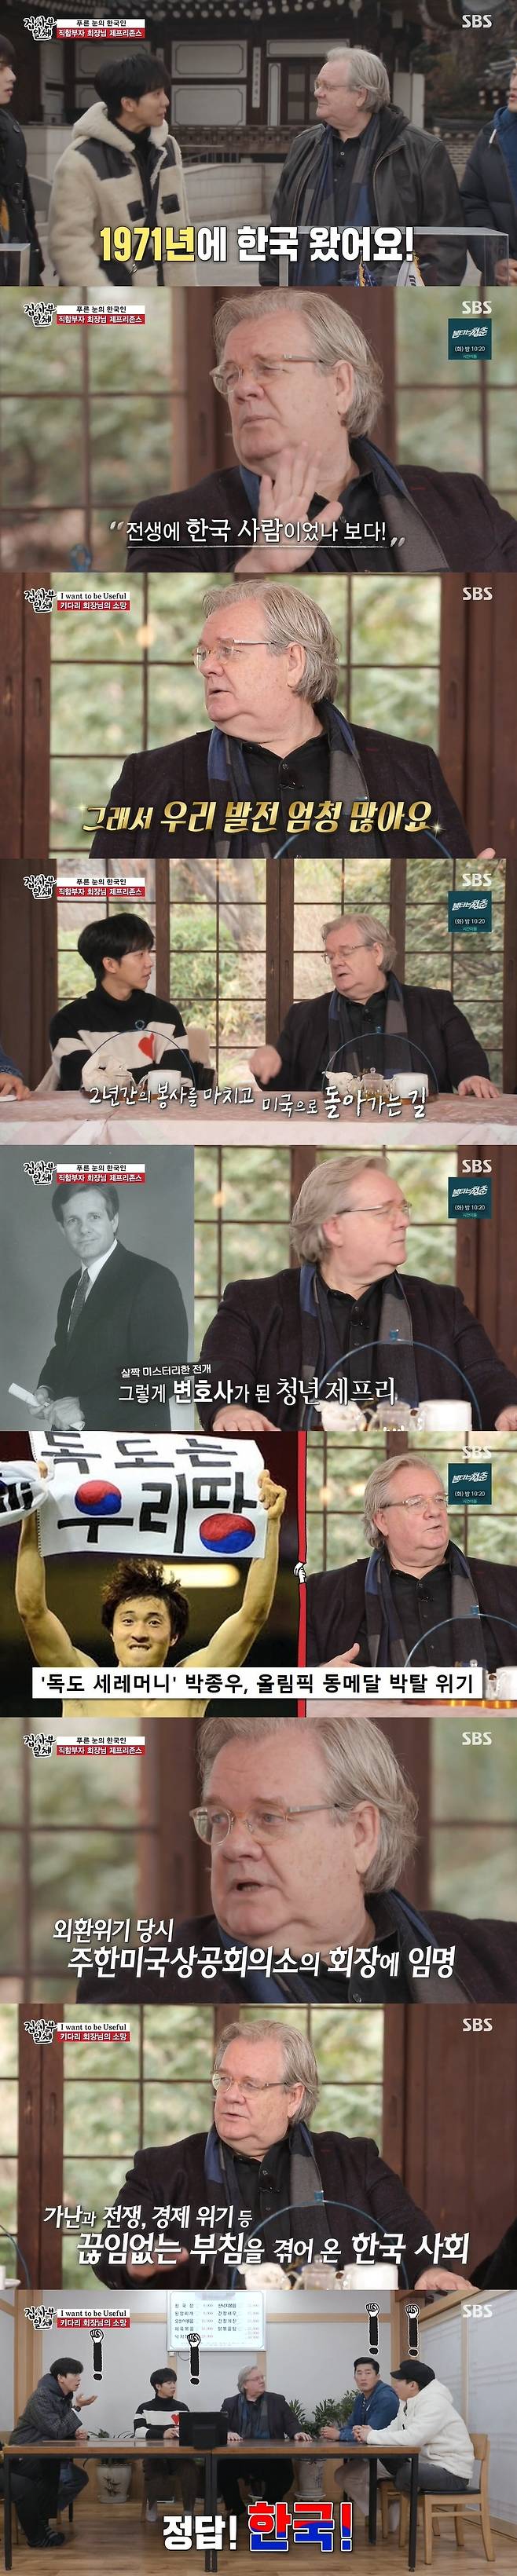 Seoul:) = United States of America Chamber of Commerce and Industry Chairman and Lawyer, and non-profit foundation chairman Jeffrey Quincy Jones spoke about Korea, which is Europe.Jeffrey Quincy Jones appeared on SBS All The Butlers on the afternoon of the 17th as a new master and talked about it.Jeffrey Quincy Jones, who is the chairman of the Lawyer and nonprofit welfare organization foundation of the largest law firm in Korea, famous for its blue-eyed Korean, and chairman of the United States of America Chamber of Commerce in Korea.He is a Korean name Jo Jae-pil. He visited Korea in 1971 and stayed in Korea as a volunteer car. He has been working as a chairman of Lawyer and Chamber of Commerce.I came to Korea as a volunteer student, but that day was August 15, 1971, and I remember exactly, he said. At that time, when I arrived at Gimpo Airport when I did not have Incheon International Airport, I had a memory about the field, and we did not know the weather in August.I felt it, and as soon as I opened the door (the airplane), I smelled the manure, and there were a lot of foreigners around me, but I was embarrassed because I was not familiar with them, and I just thought, I came home.Its weird, isnt it? he recalled.So I thought I was a Korean person in my past life, and I thought I fell into United States of America to learn English. I am in Korea for a long time and I make a mistake when I go to United States of America.Jeffrey Quincy Jones, who lives in Korea for a long time, has some things that I do not understand yet.I do not think my stomach hurts, I do not have to be hungry, but I can not stand stomach pain, he said. But when I see Eunwoo, my stomach hurts.I am so good-looking and slim that I can sit next to you like this. Jeffrey Quincy Jones also reveals why he did Lawyer in KoreaI was not studying law, and I heard a lot of stories about my brother or mother in everyday conversations because I had a lot of problems with separated families when I served for two years at the time, he said. Like yesterday, Memory was returning to United States of America after two years of service.We Europe people had a lot of real trauma, but when I went to school, I did not fit in, so I became a Lawyer because I had nothing to do. As Lawyer, Jeffrey Quincy Jones has been a Prayer for free to defend sports players in various fields and contribute to unravelling injustice.Our European soccer team did very well, Park Jong-woo said at the London Olympics in 2012, but Park Jong-woo did not give the bronze medal to the athlete only at the Olympics because he took the placard of Liancourt Rocks, so I was very happy to win the medal again. I recalled the time.As a corporate merger specialist Lawyer, Prayer has revealed his defense activities for Korea.Jeffrey Quincy Jones said, I thought I would save Korea India, so I was able to attract investment to Korea so that I could attract a lot of investment to Korean companies and increase my job. At the time of the IMF, I was chairman of the United States of America Chamber of Commerce and Industry as Lawyer. I discussed a lot about it, he said, and was surprised.Jeffrey Quincy Jones, who has been working for Korea constantly, said, We had a lot of Danger in Korea, and we have made a lot of progress as well.We do not give up on any Danger, we try and overcome it, he said. Goldman Sachs ranked Korea second in the 2050 world GDP rankings.After 70 years, it has changed to Europe, which can help in Europe. We fight Europe. I always say I Want to Be You, which is the purpose of my life, the goal of my life, he said. It would be nice to remember that he was a very useful person even after I died.